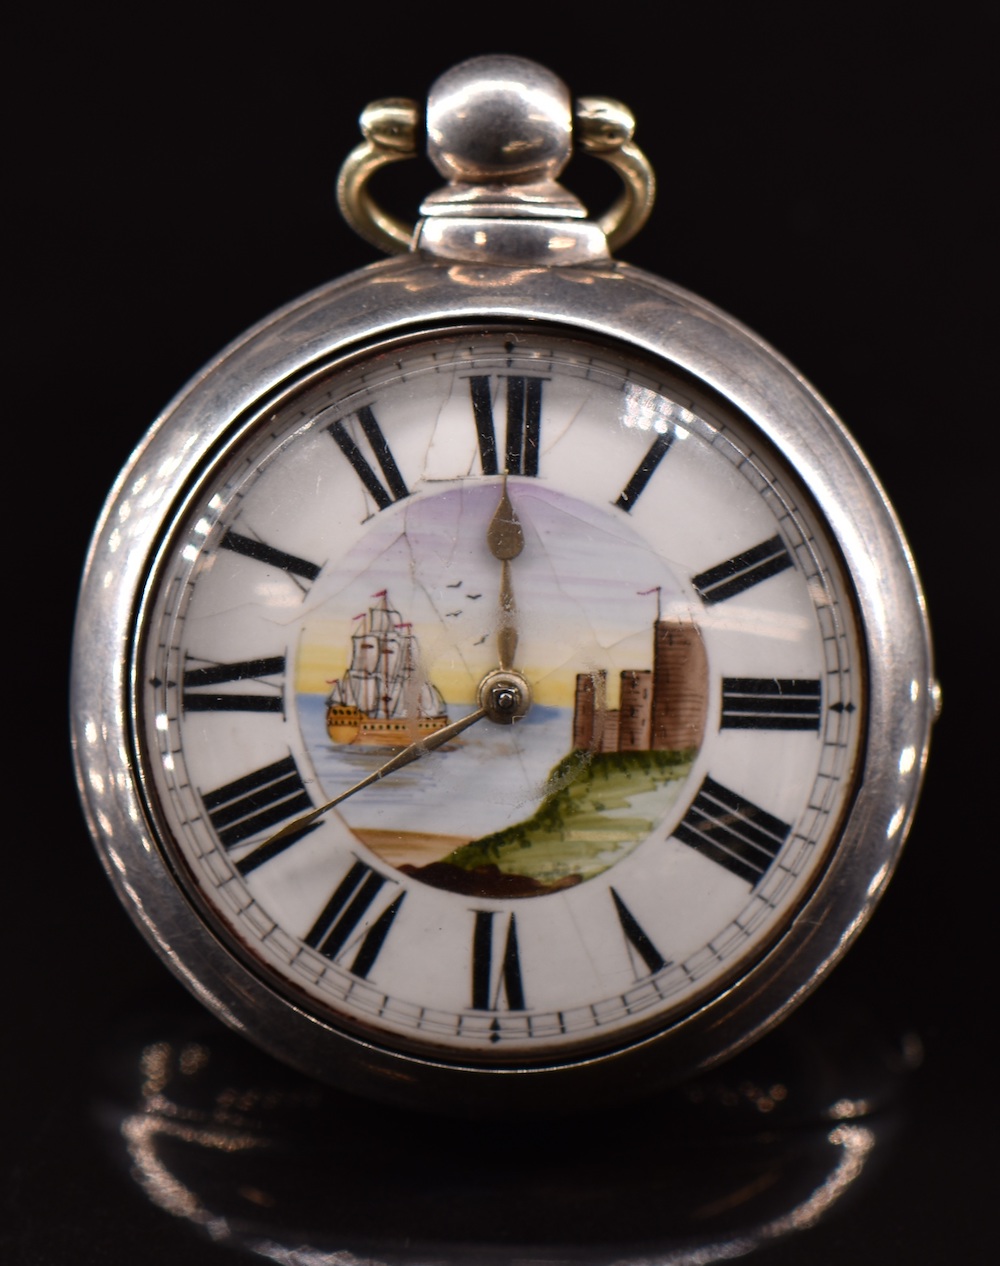 Edward Wilkins Of Newport Isle Of Wight Hallmarked Silver Pair Cased Open Faced Pocket Watch Sold £320